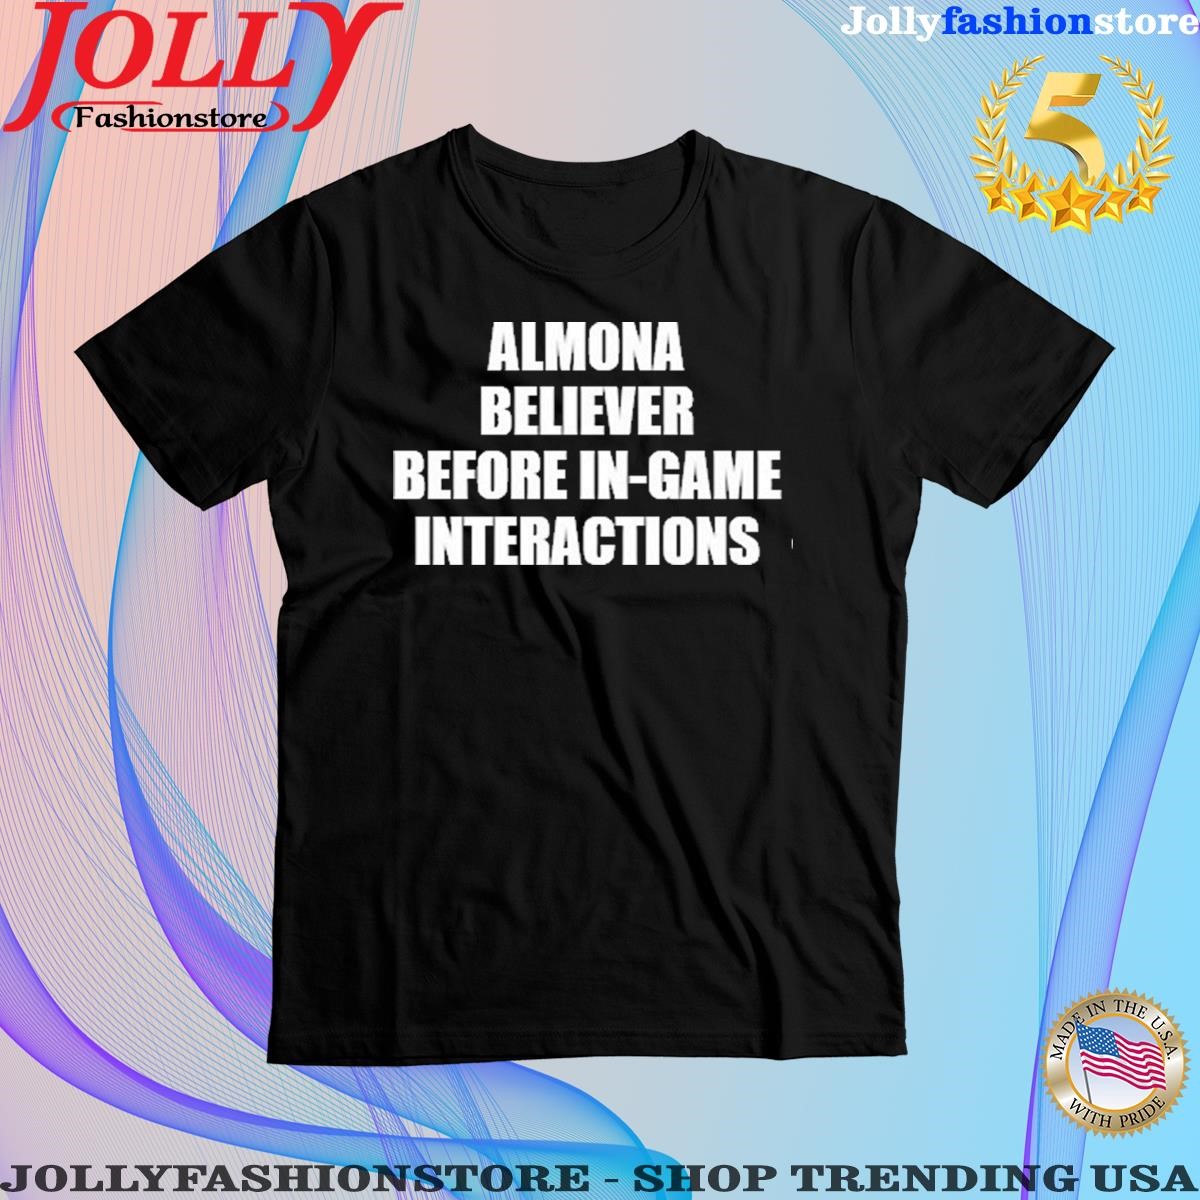 Almona believer before in game interactions T-shirt